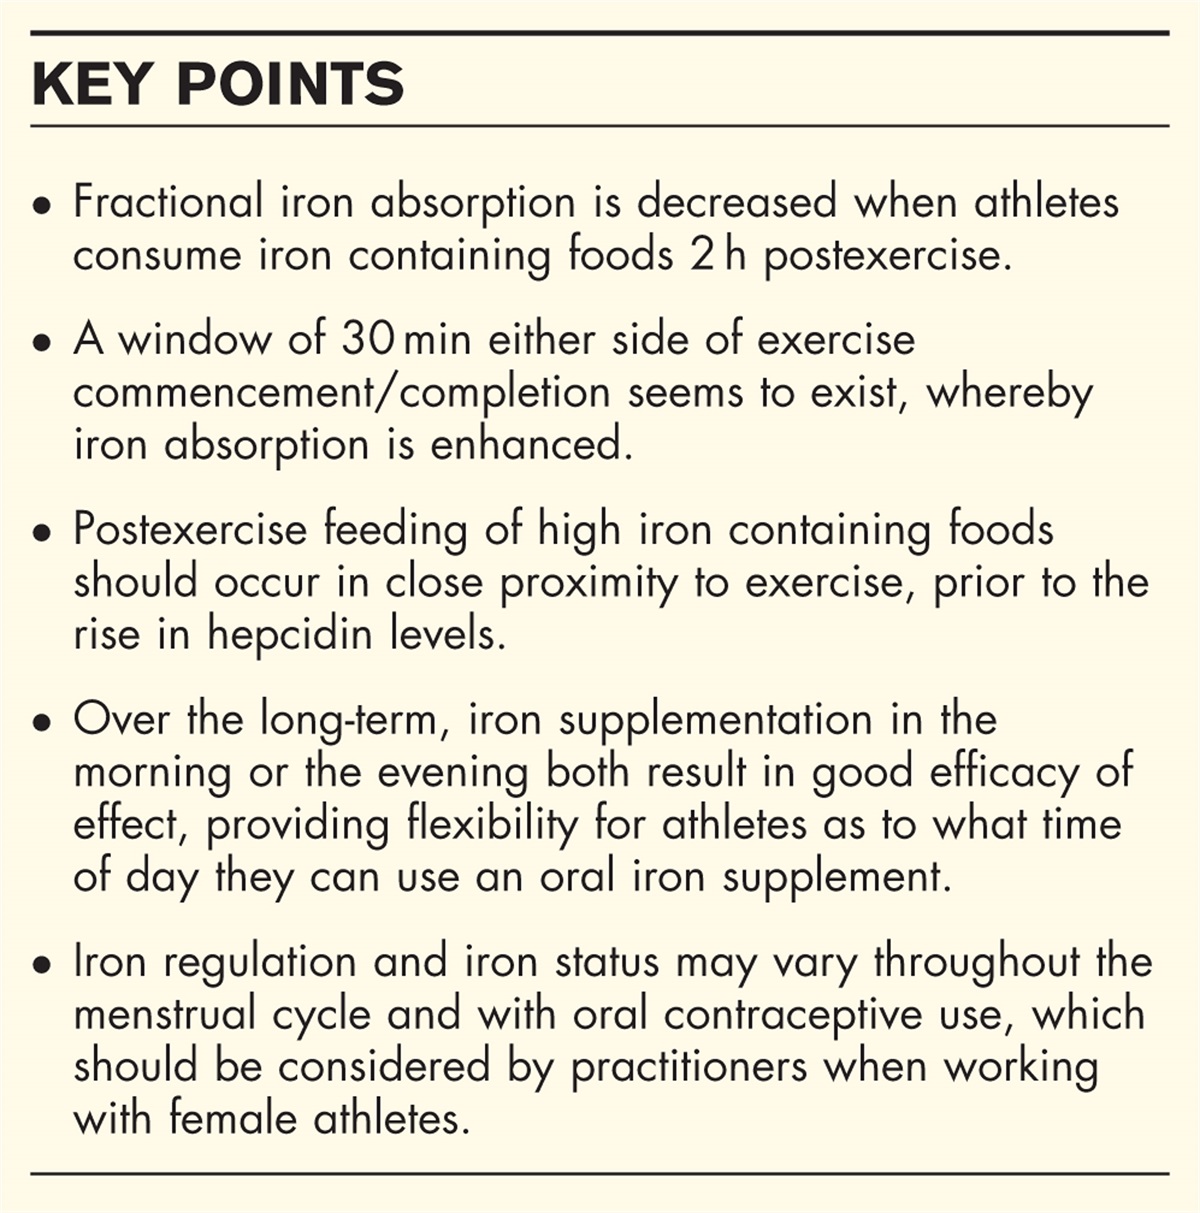 Iron regulation and absorption in athletes: contemporary thinking and recommendations